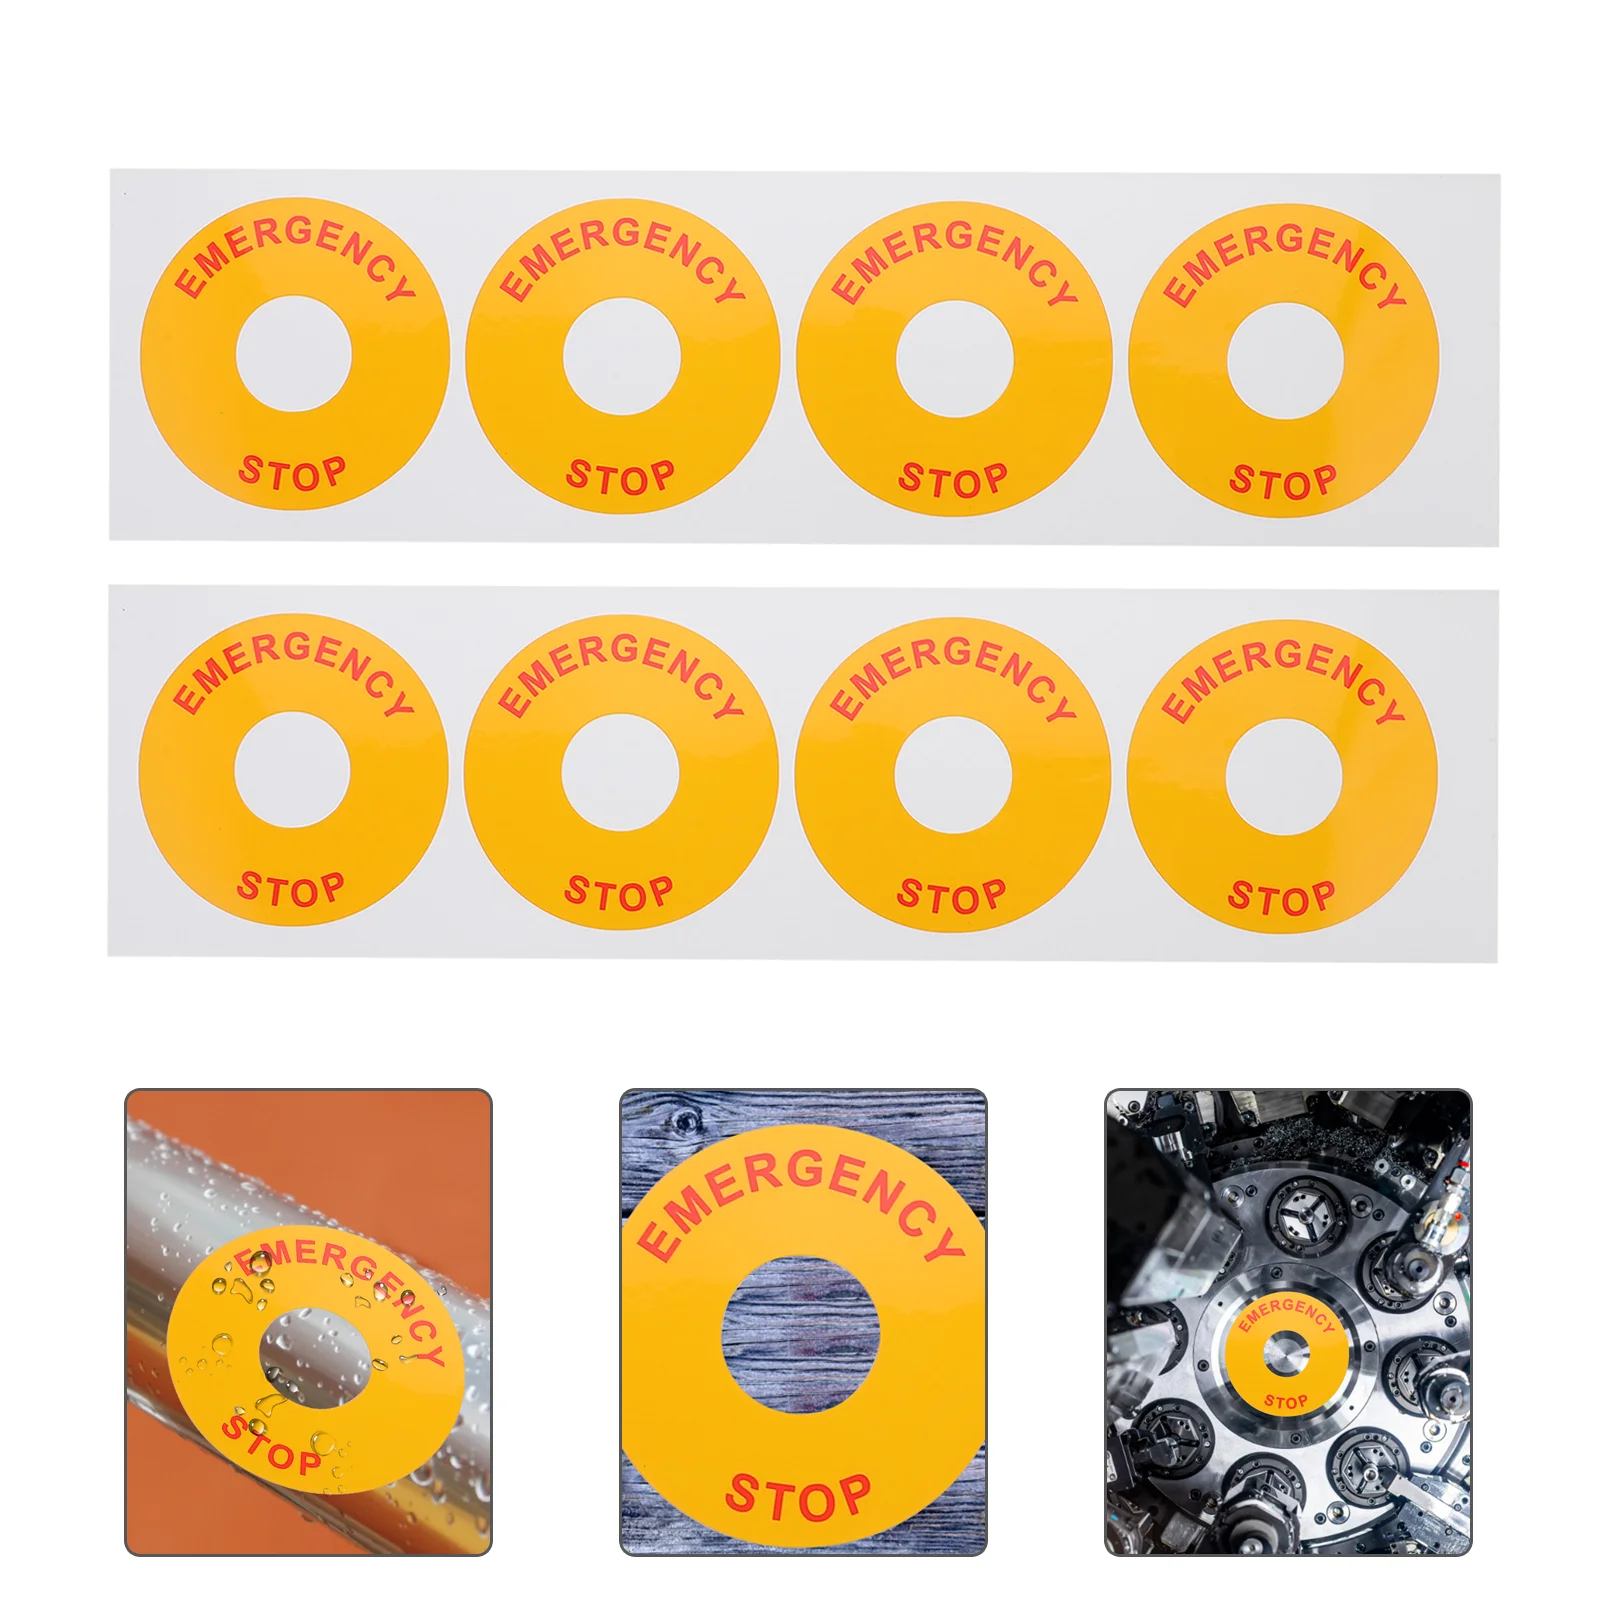 

8 Pcs The Sign Emergency Stop Warning Label Push Button Switch Pp Equipment Decal